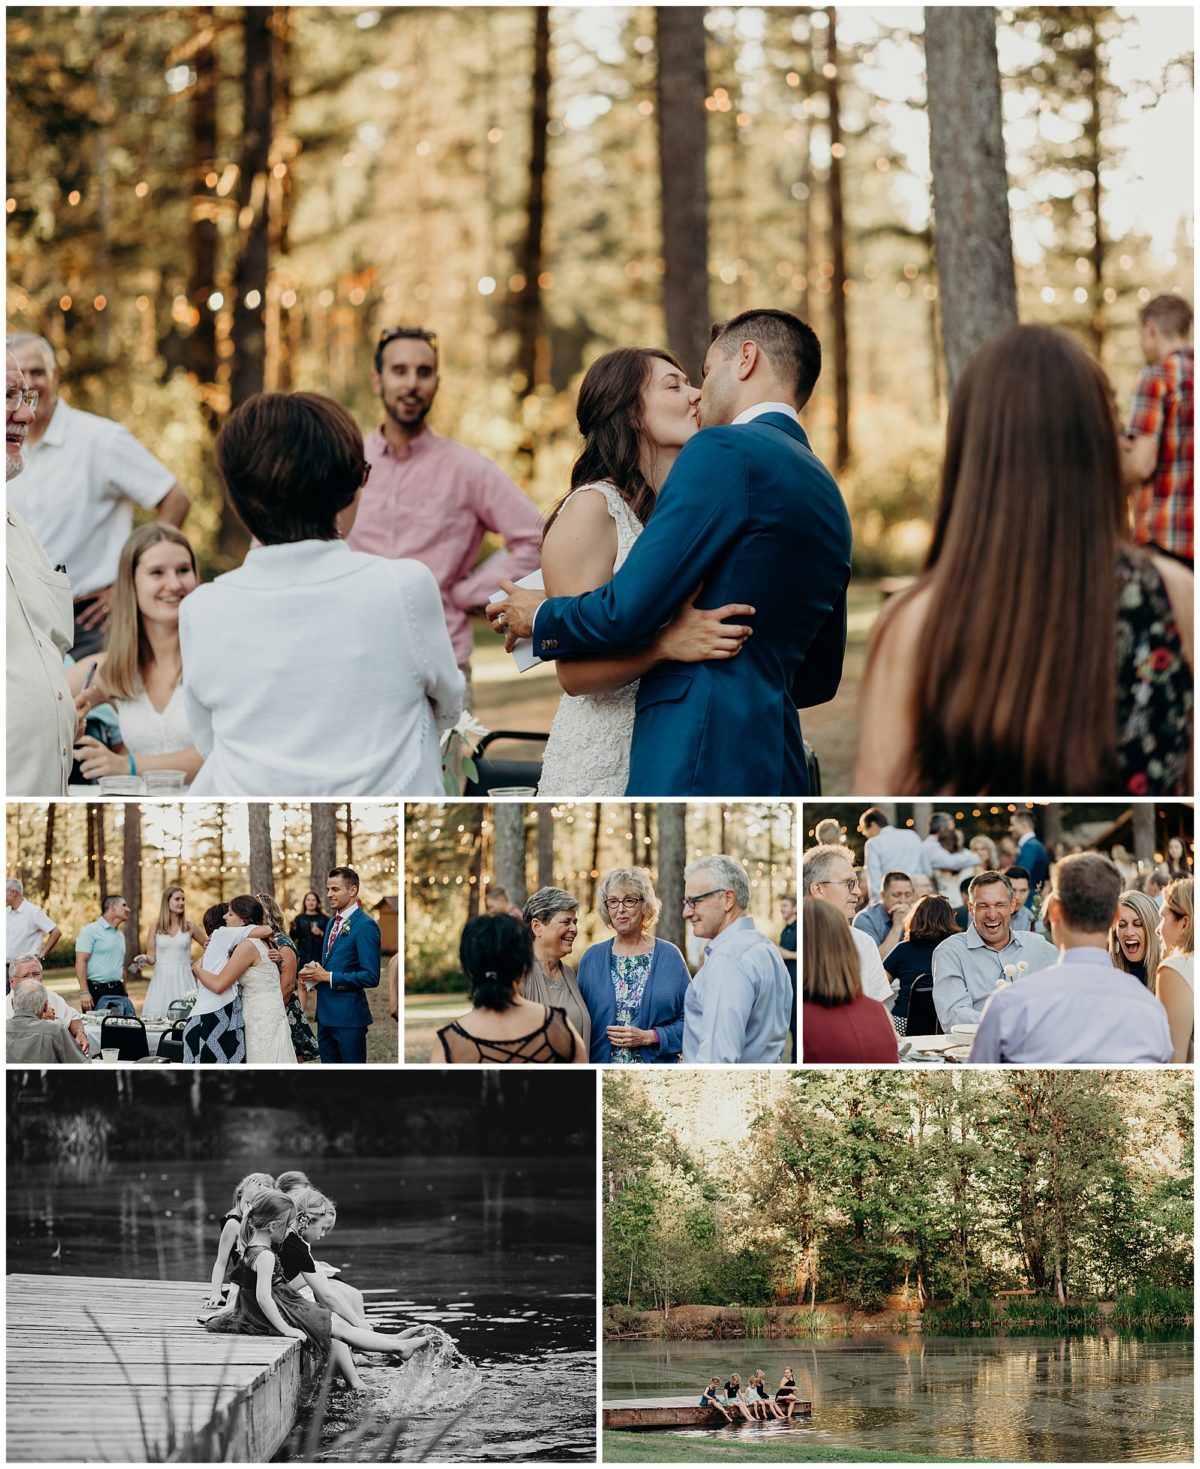 Wedding guests socialize during a reception at a summer camp.